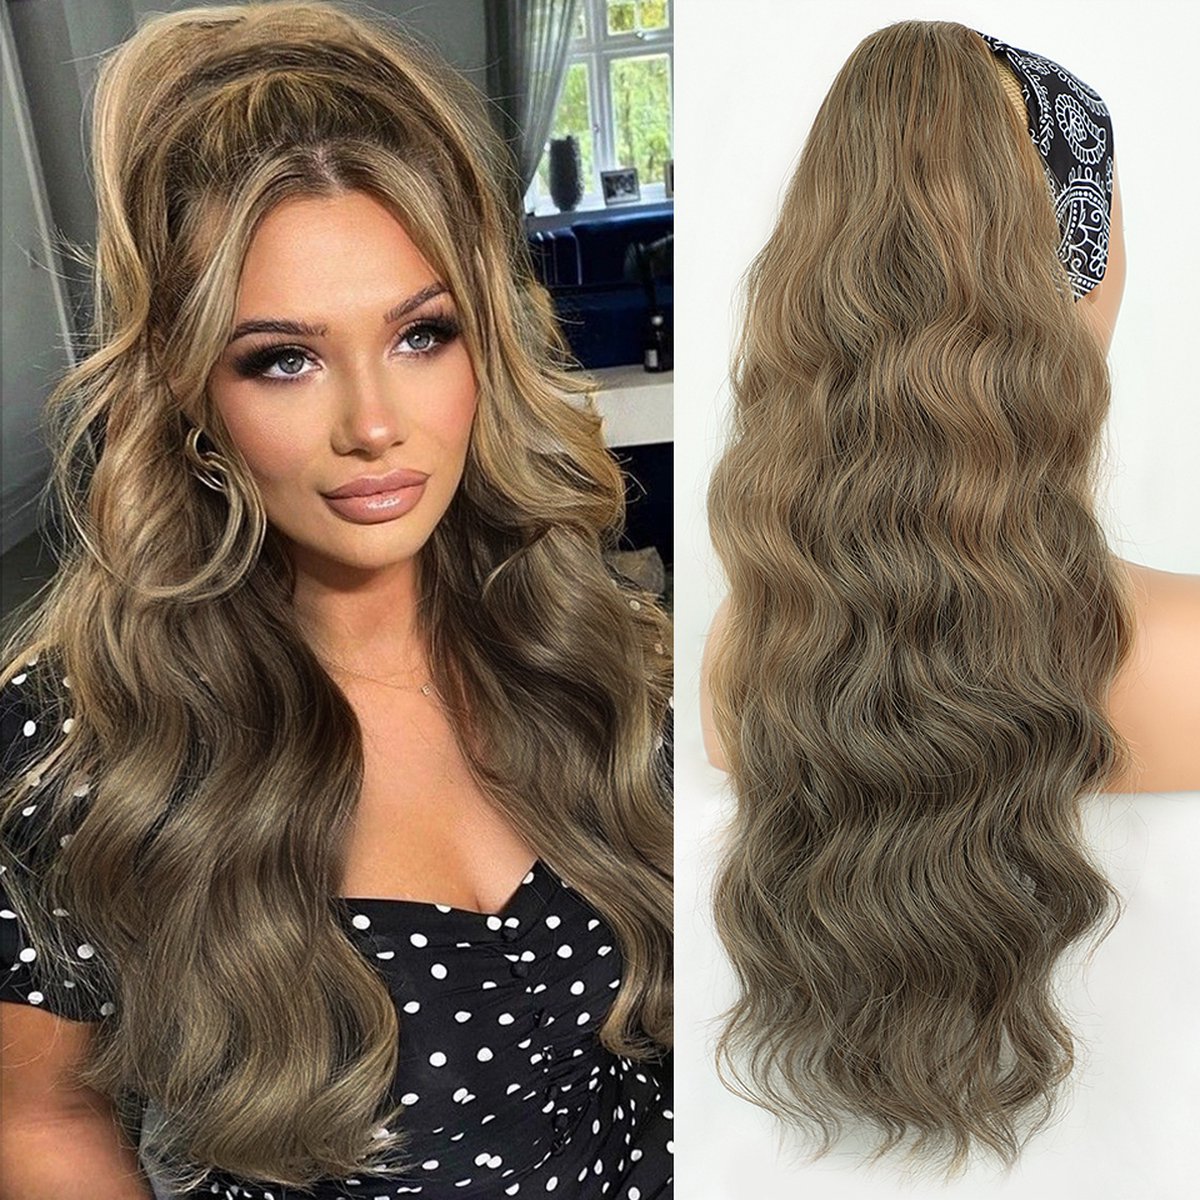 Miss Ponytails - Bodywave ponytail extentions - 24 inch - Blond / Bruin 4-613 - Hair extentions - Haarverlenging